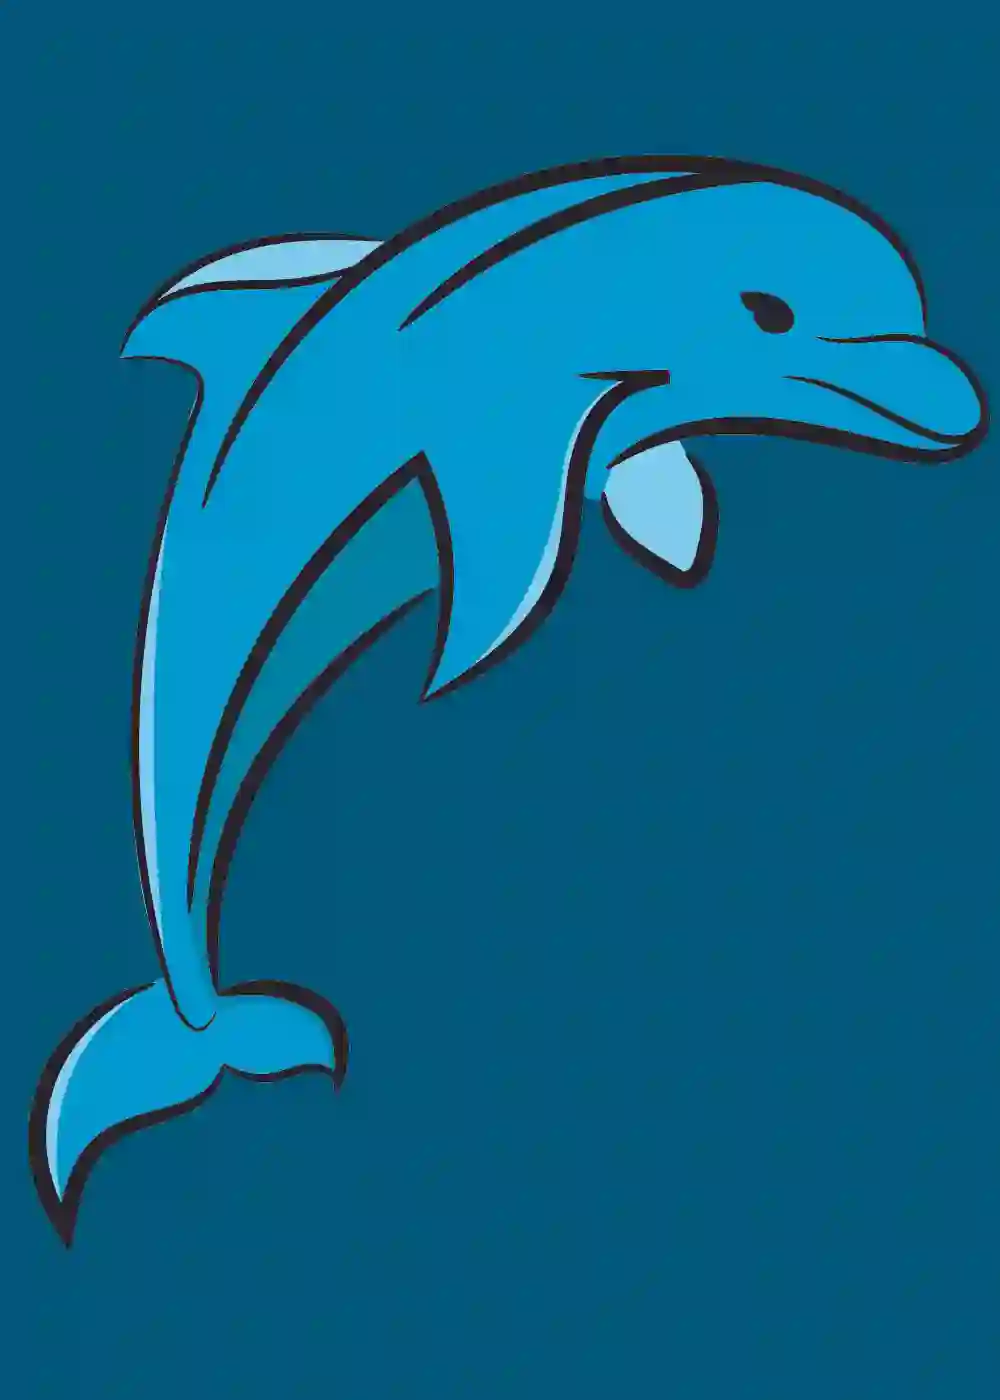 Dolphin Drawing Images  Free Photos PNG Stickers Wallpapers   Backgrounds  rawpixel